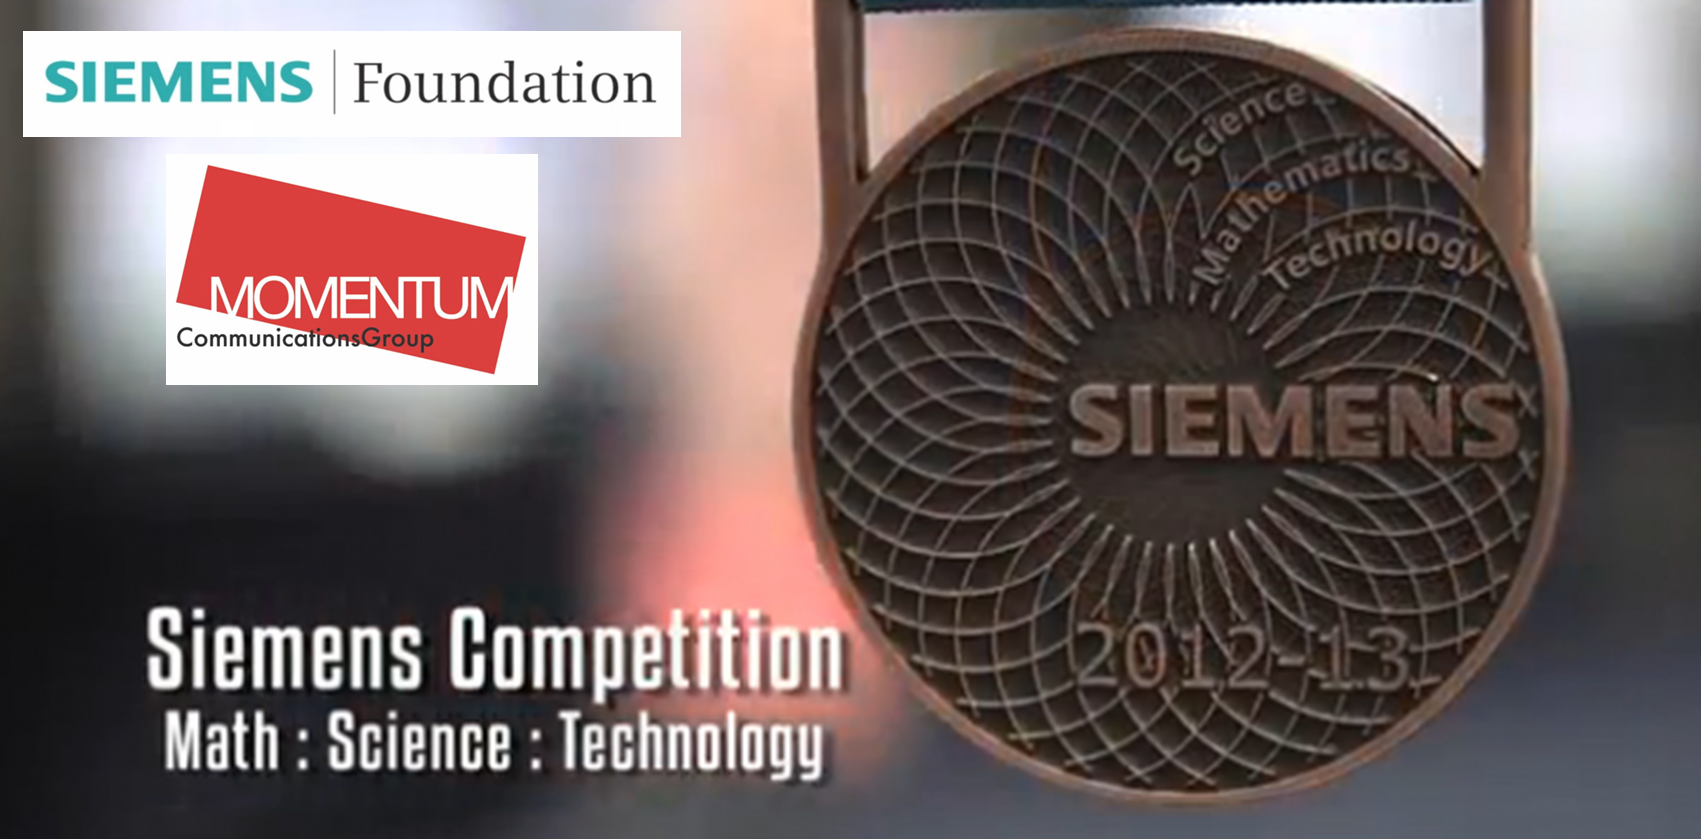 Siemens Competition in Math, Science & Technology  Honorable Mentions: - Logo - https://s41078.pcdn.co/wp-content/uploads/2018/11/Momentum-Siemens.png